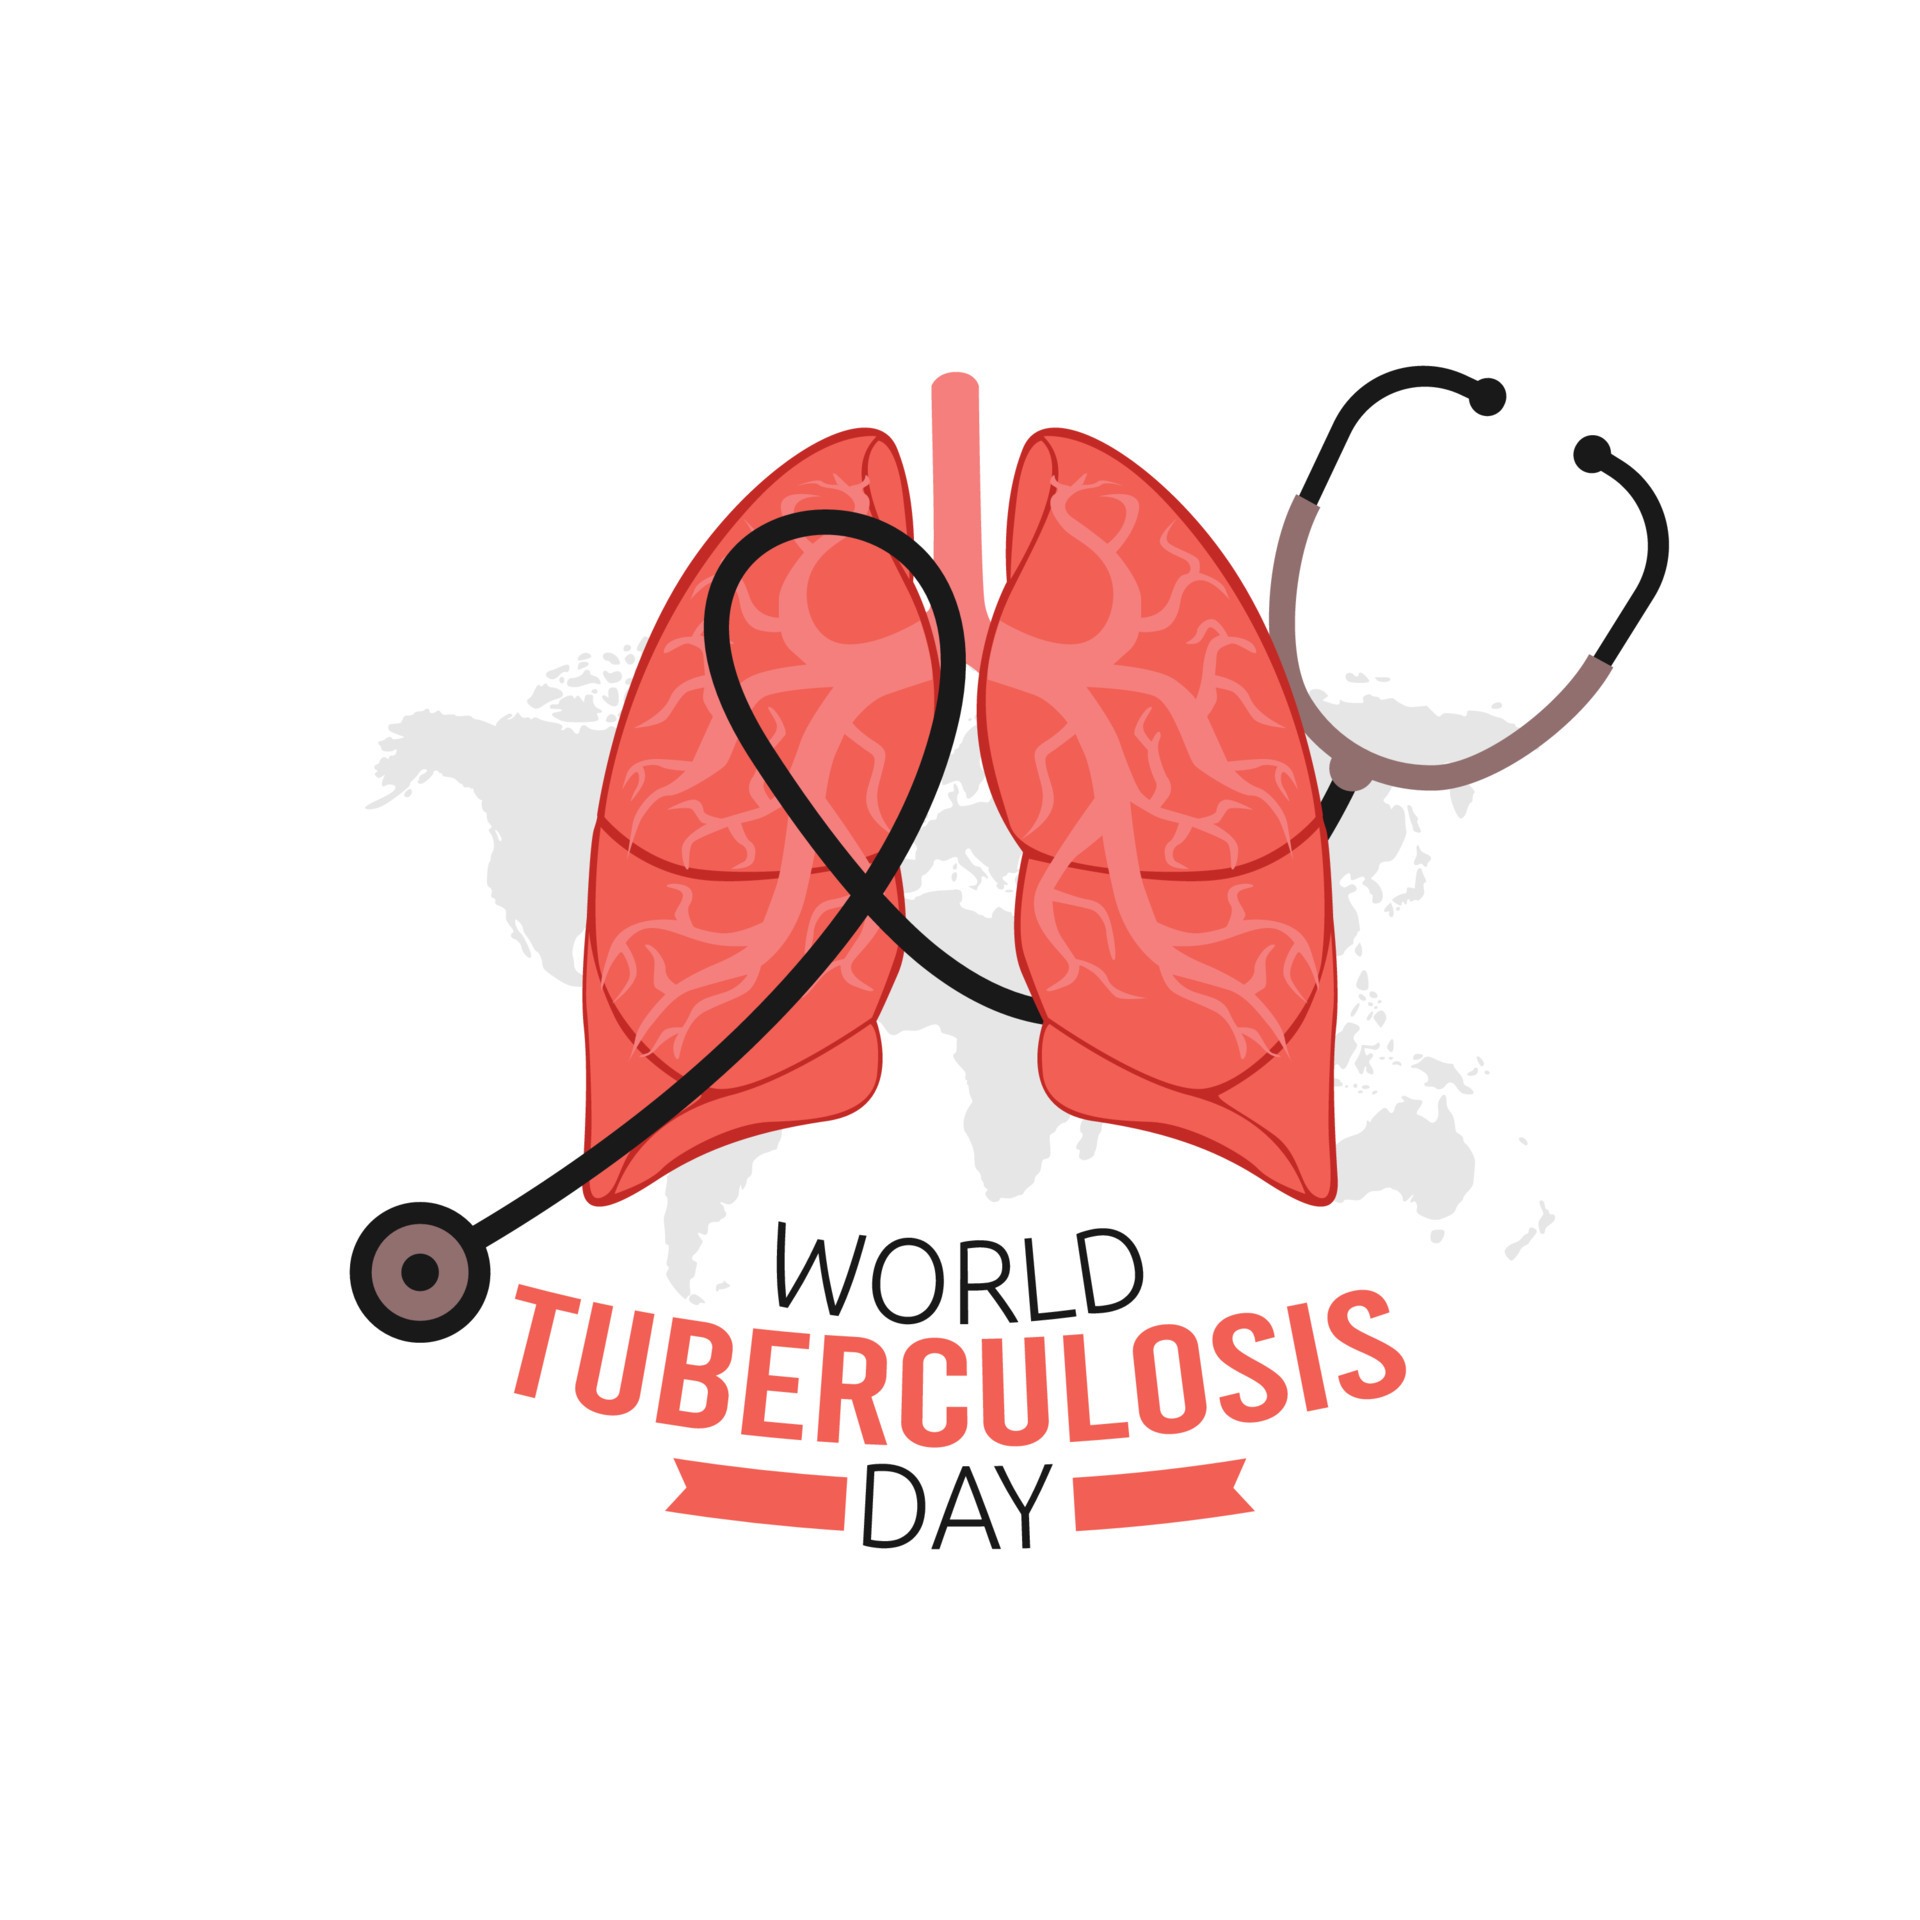 World Tuberculosis Day: Igniting Hope, Fueling Action to End TB